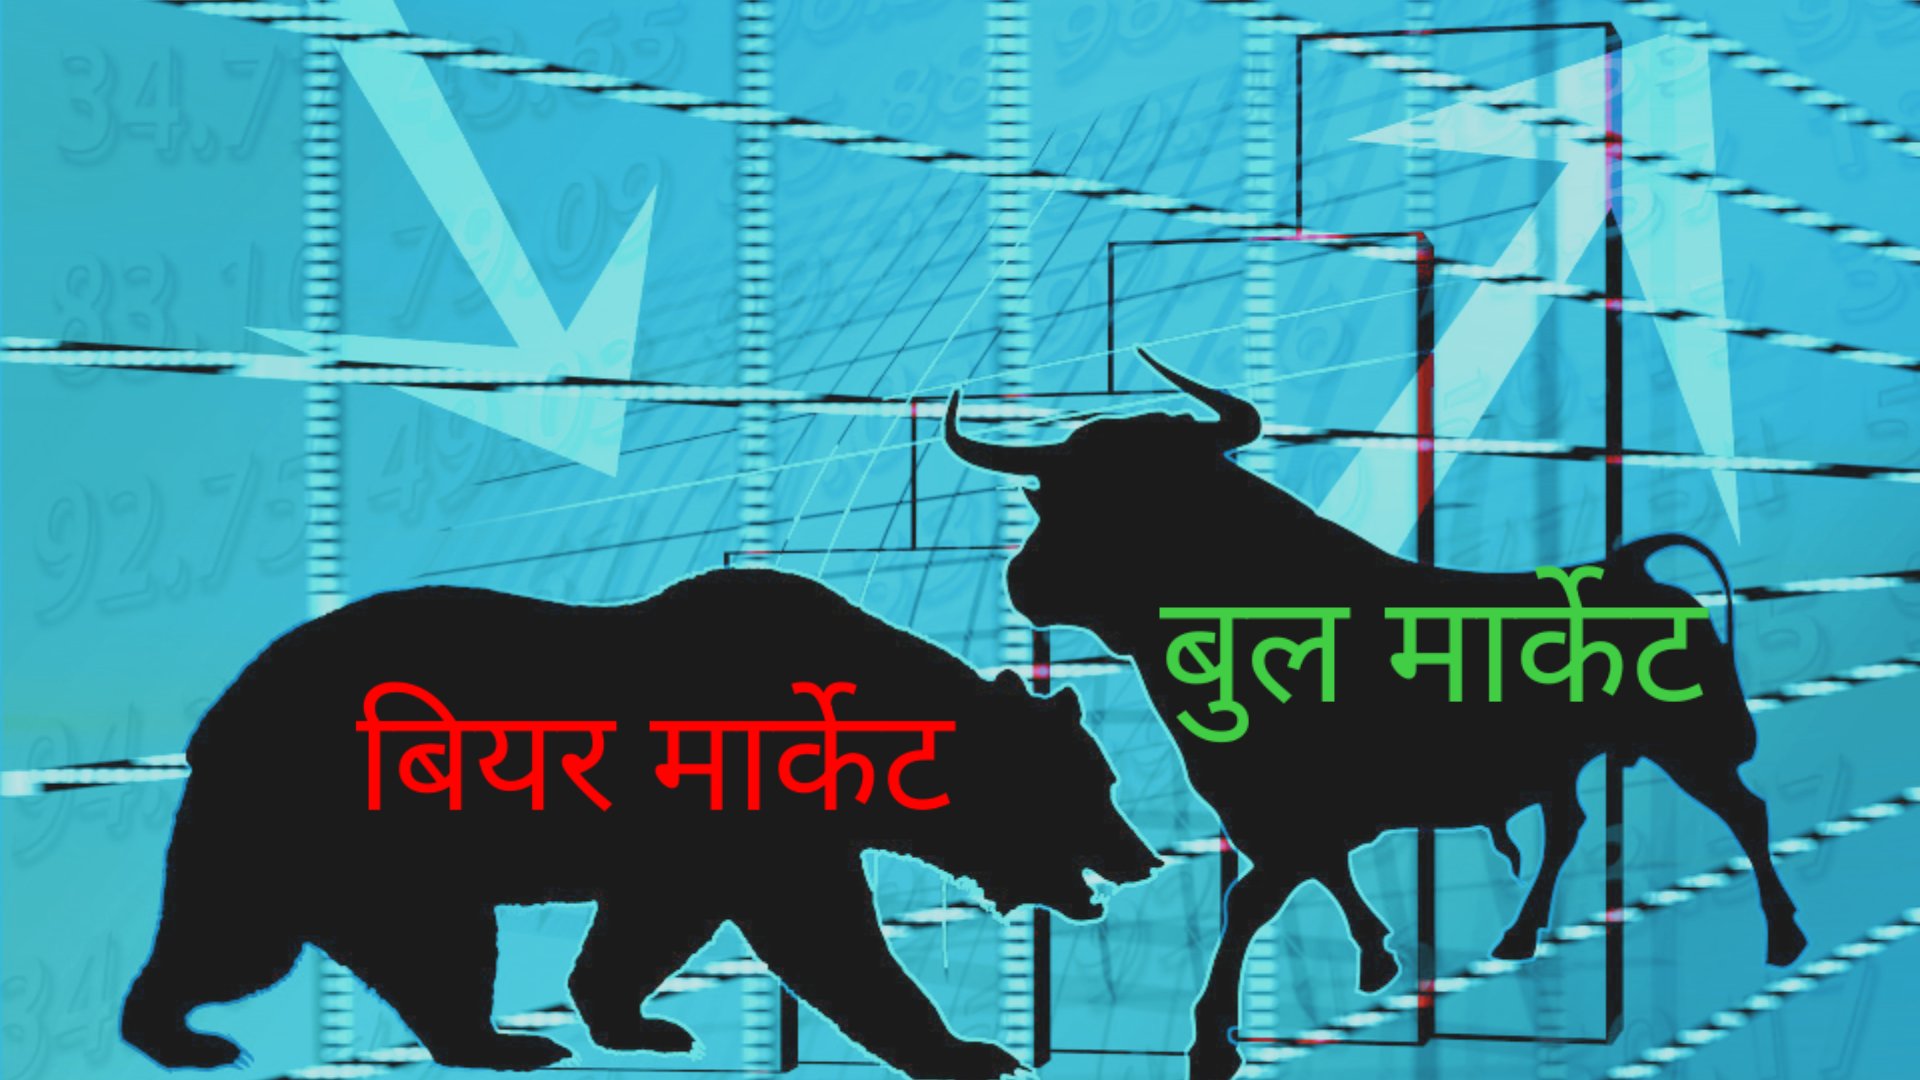 What is securities market in Hindi 2022.